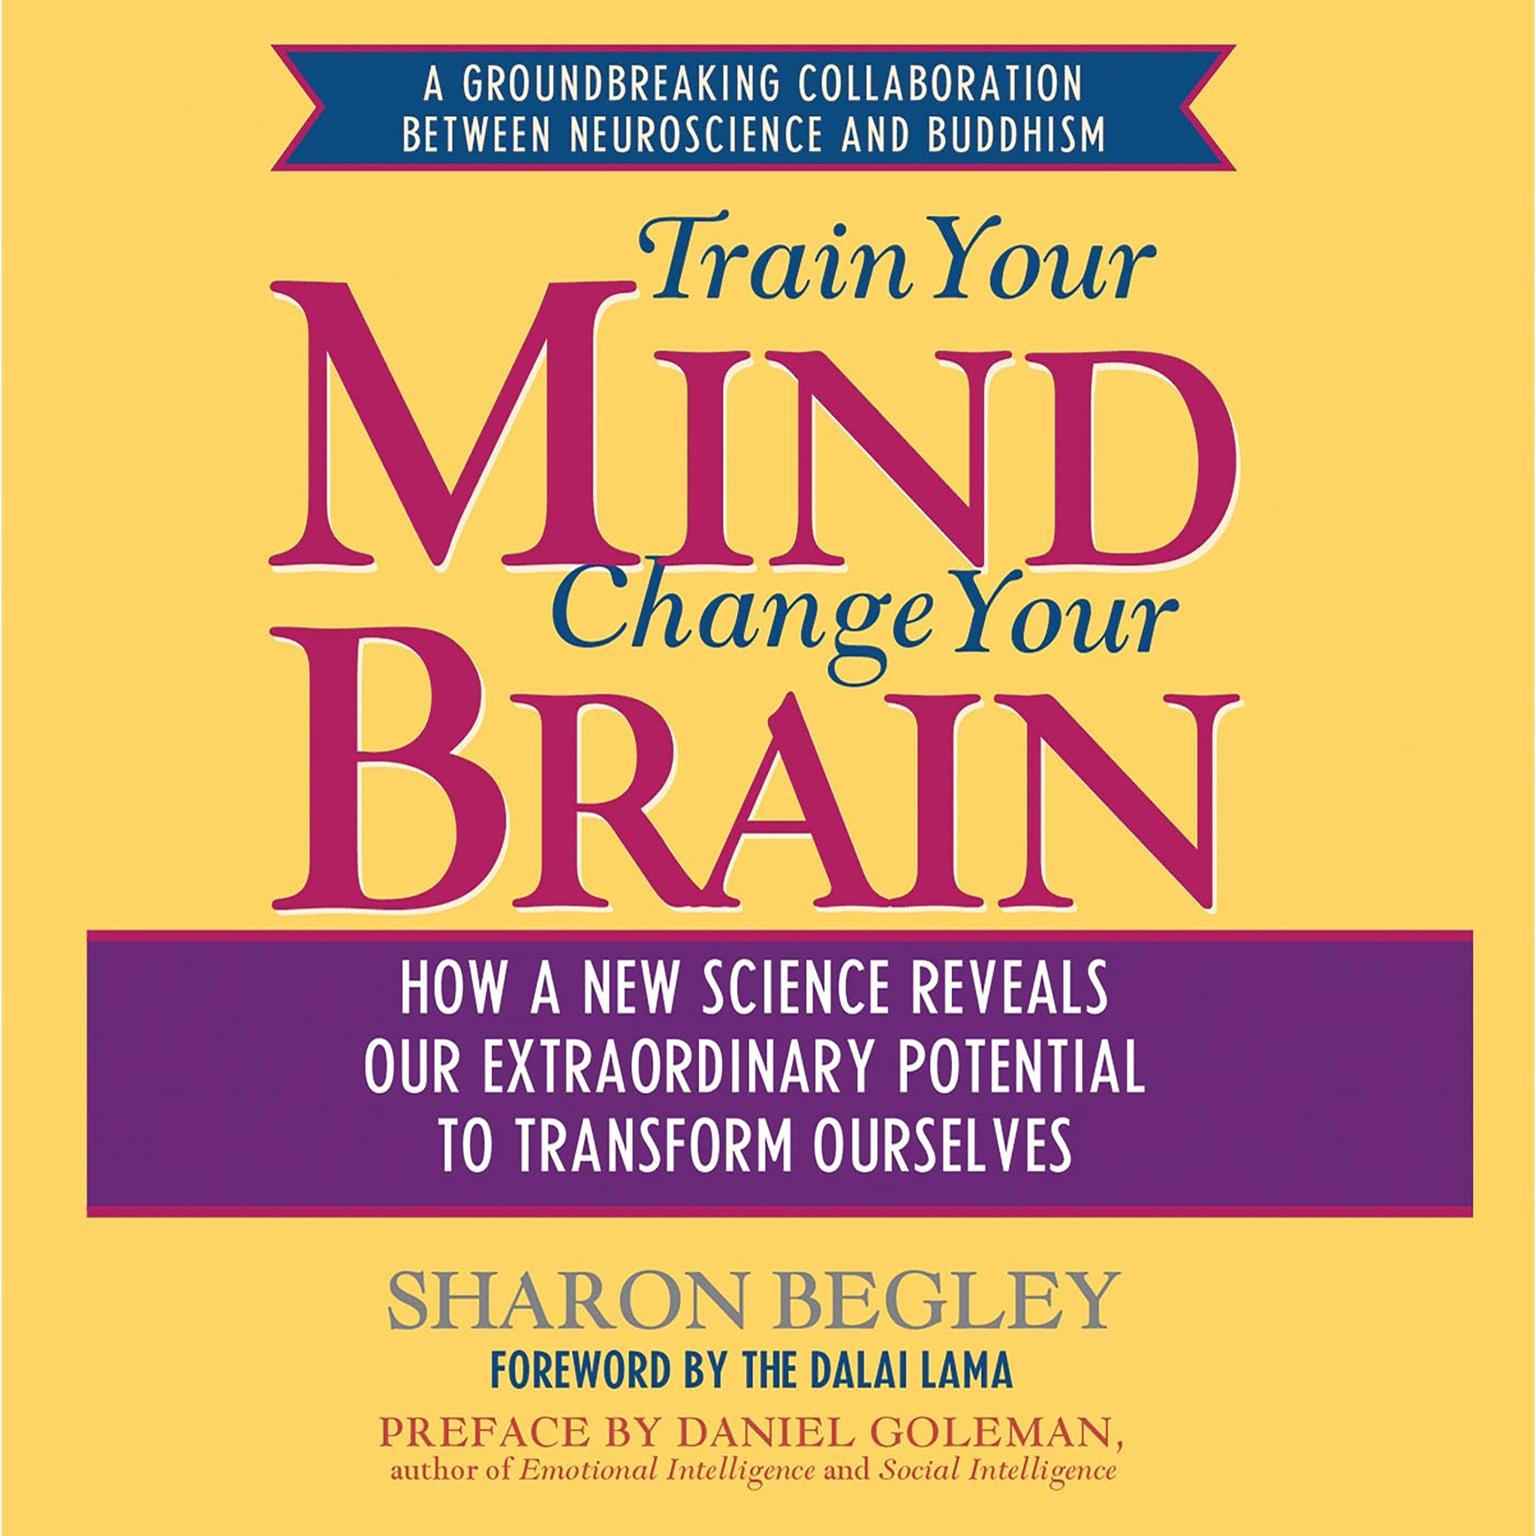 Train Your Mind, Change Your Brain (Abridged): How a New Science Reveals Our Extraordinary Potential to Transform Ourselves Audiobook, by Sharon Begley